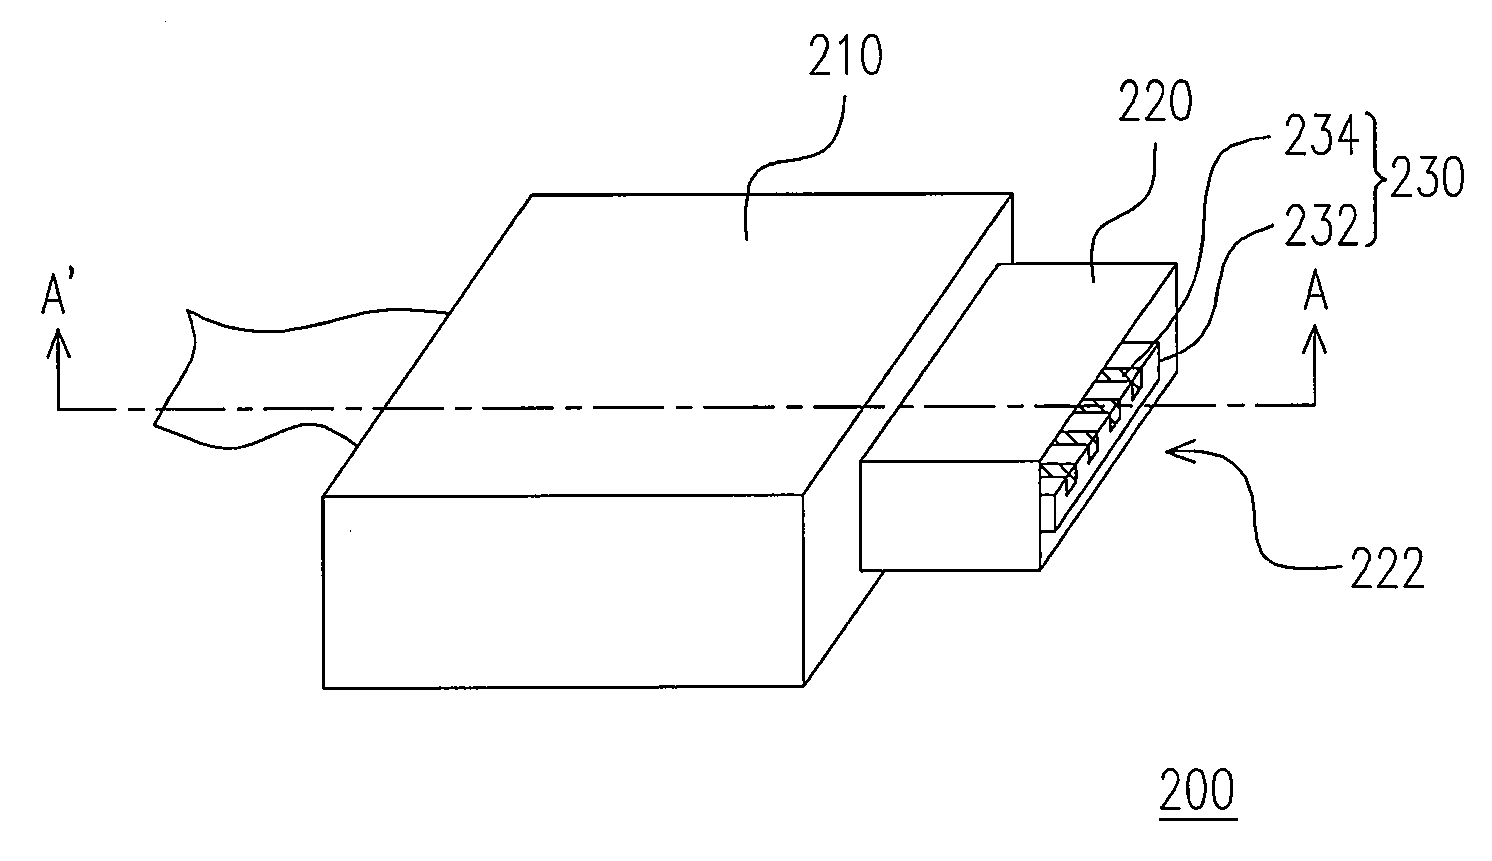 Universal serial bus connecting device